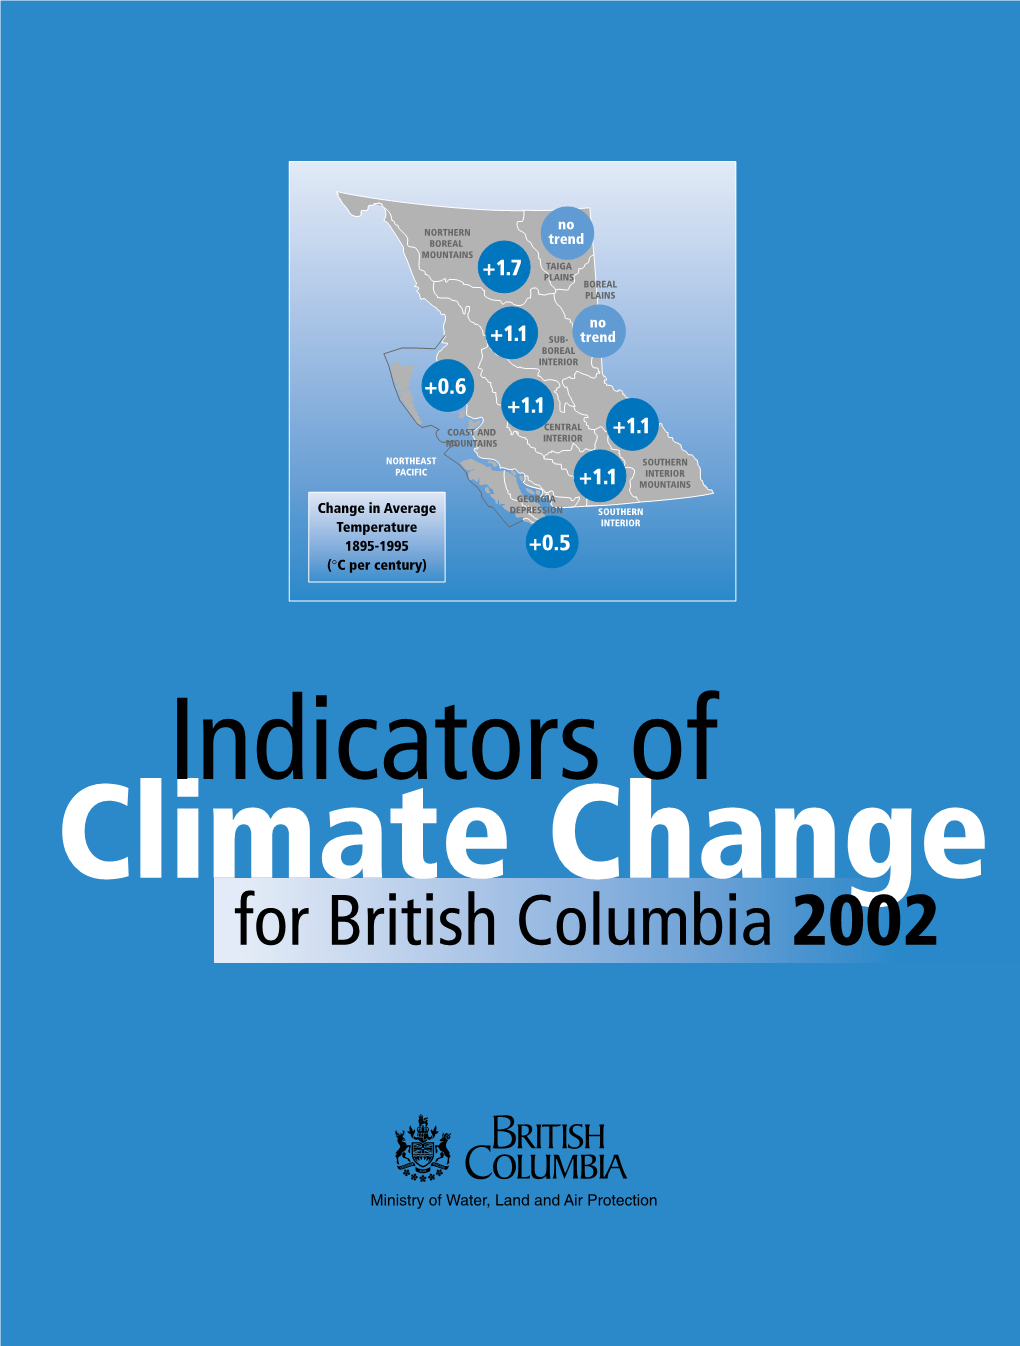 Indicators of Climate Change for British Columbia, 2002